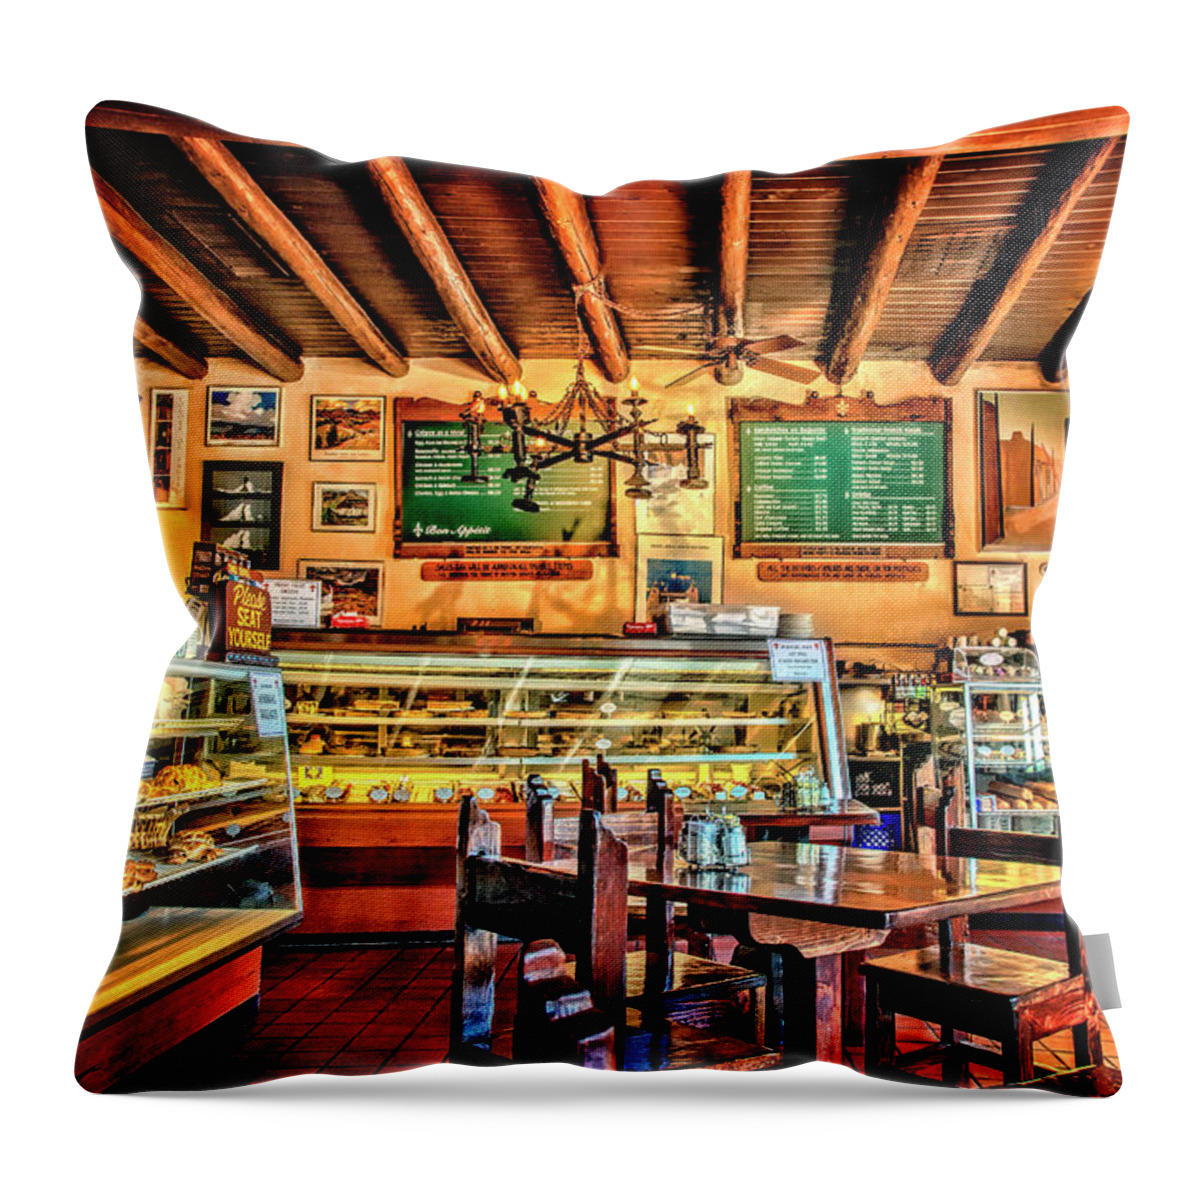 La Fonda Throw Pillow featuring the photograph French Pastry Shop by Diana Powell